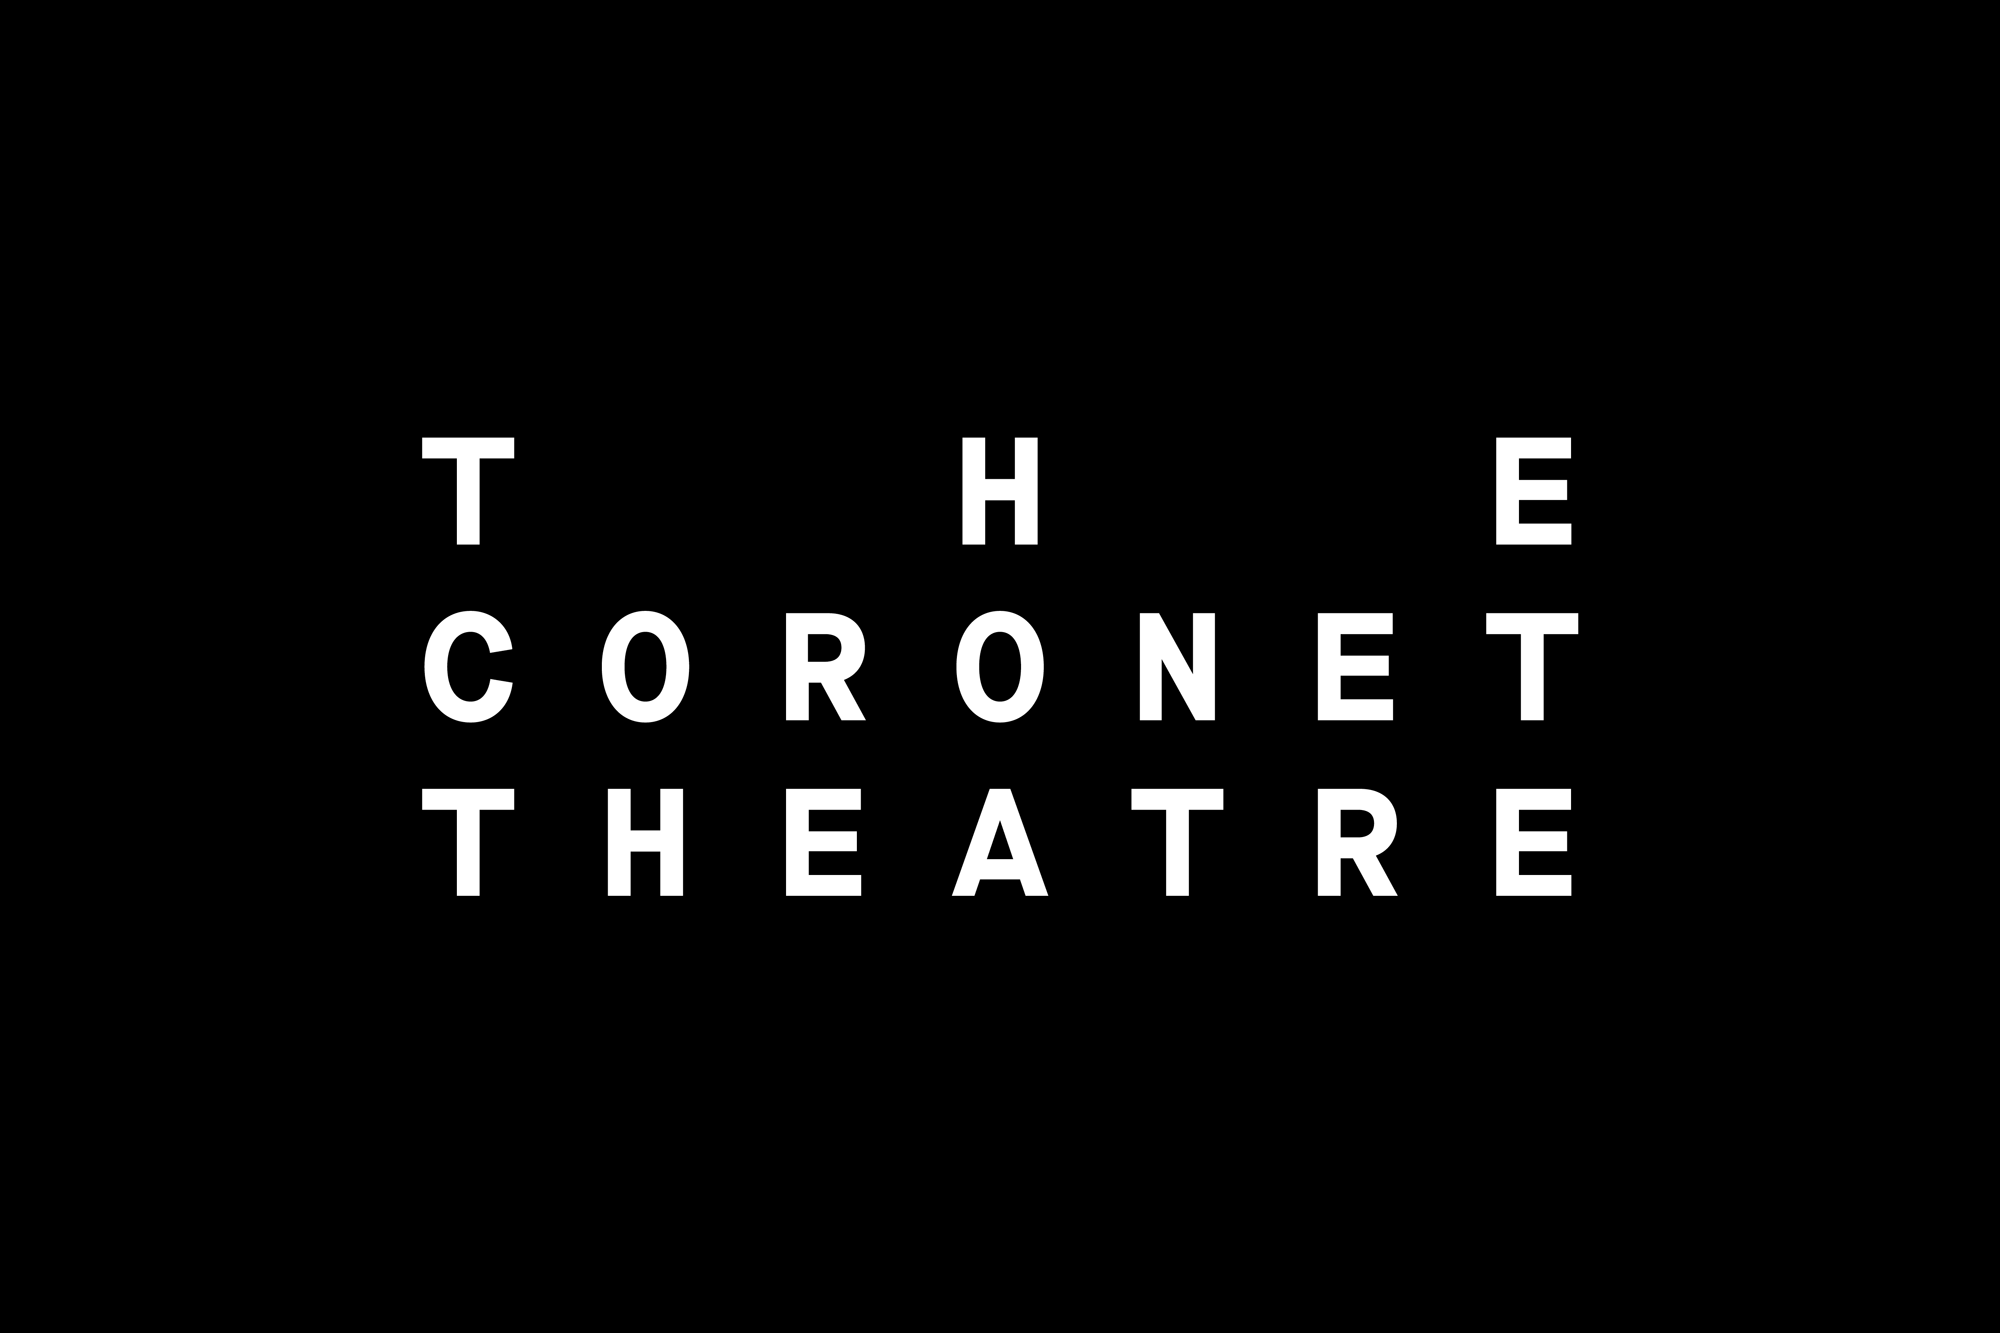 New Logo and Identity for The Coronet Theatre by North